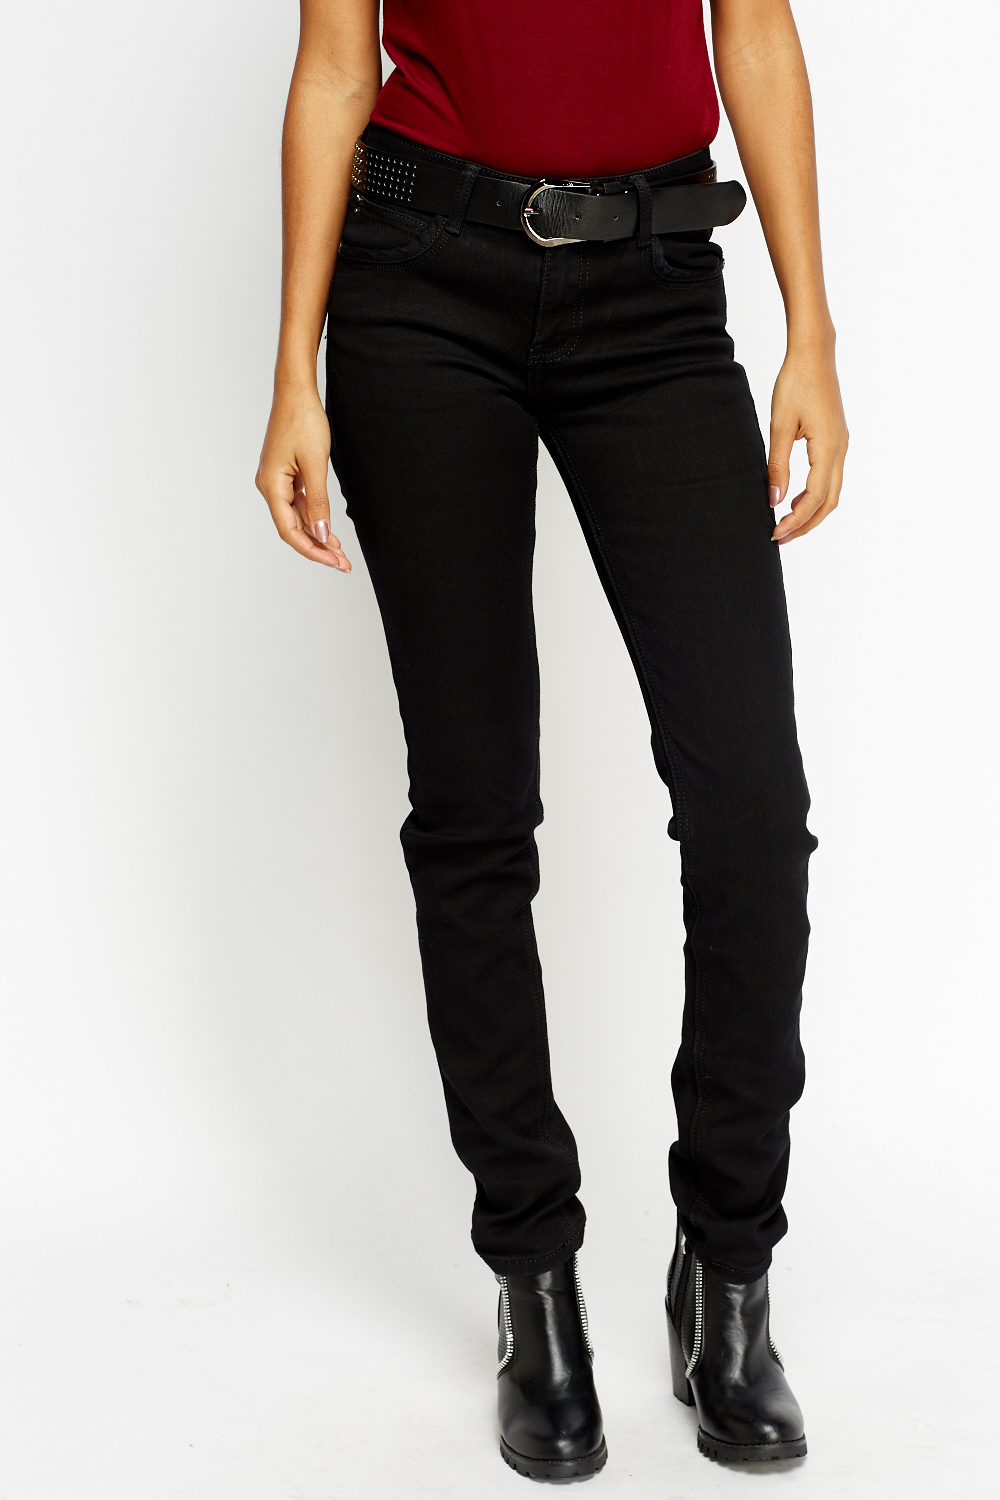 Black High Waisted Belted Jeans - Just $7